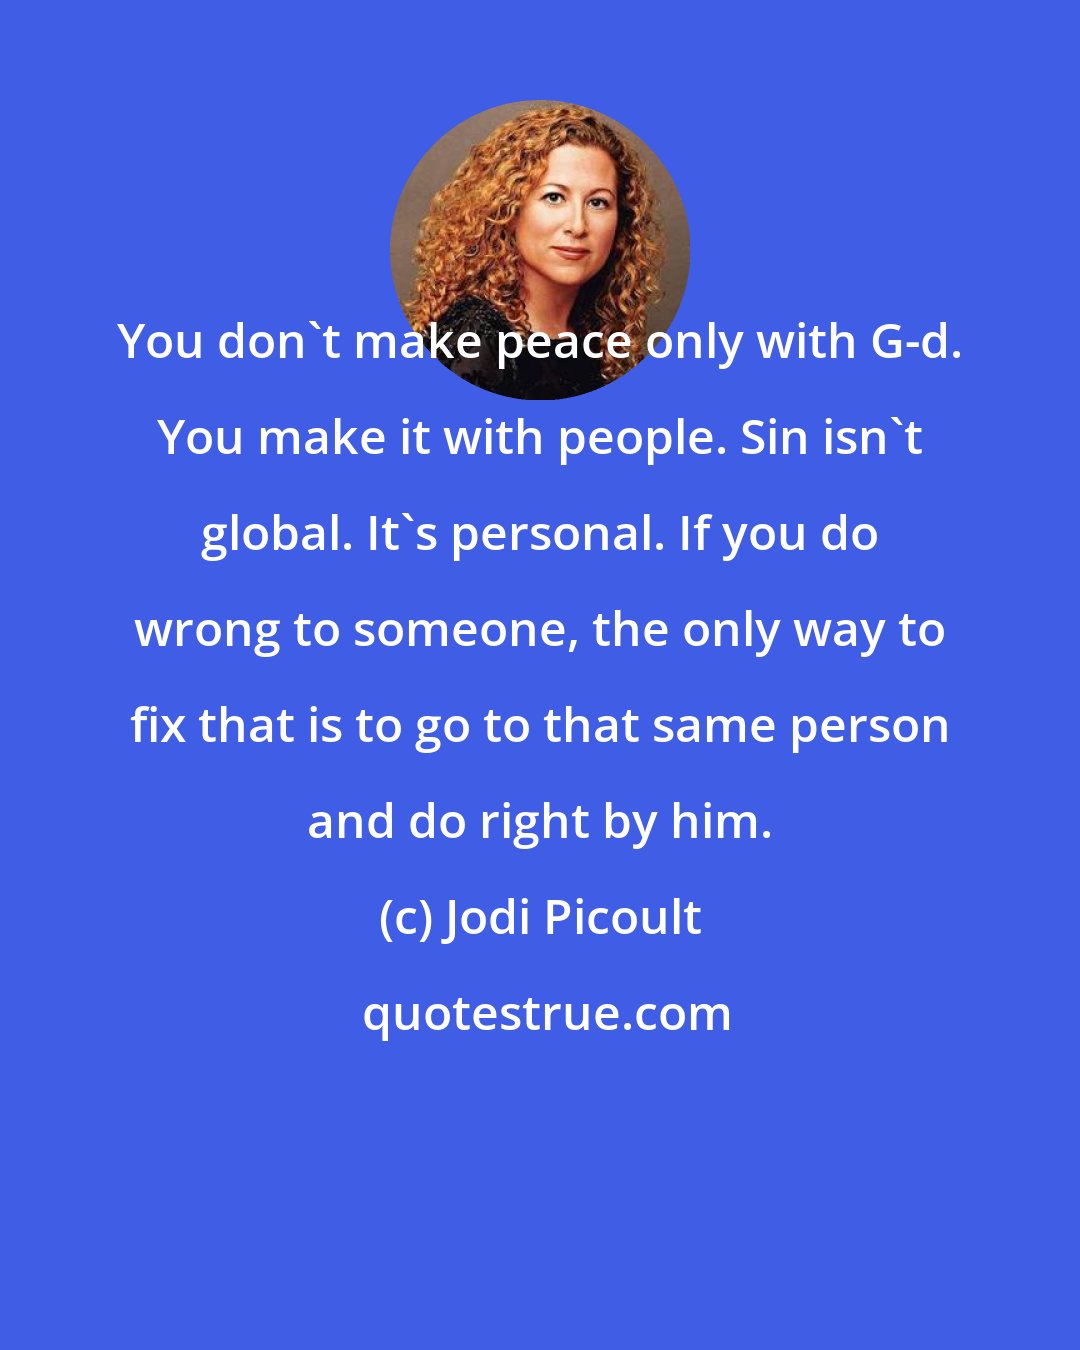 Jodi Picoult: You don't make peace only with G-d. You make it with people. Sin isn't global. It's personal. If you do wrong to someone, the only way to fix that is to go to that same person and do right by him.